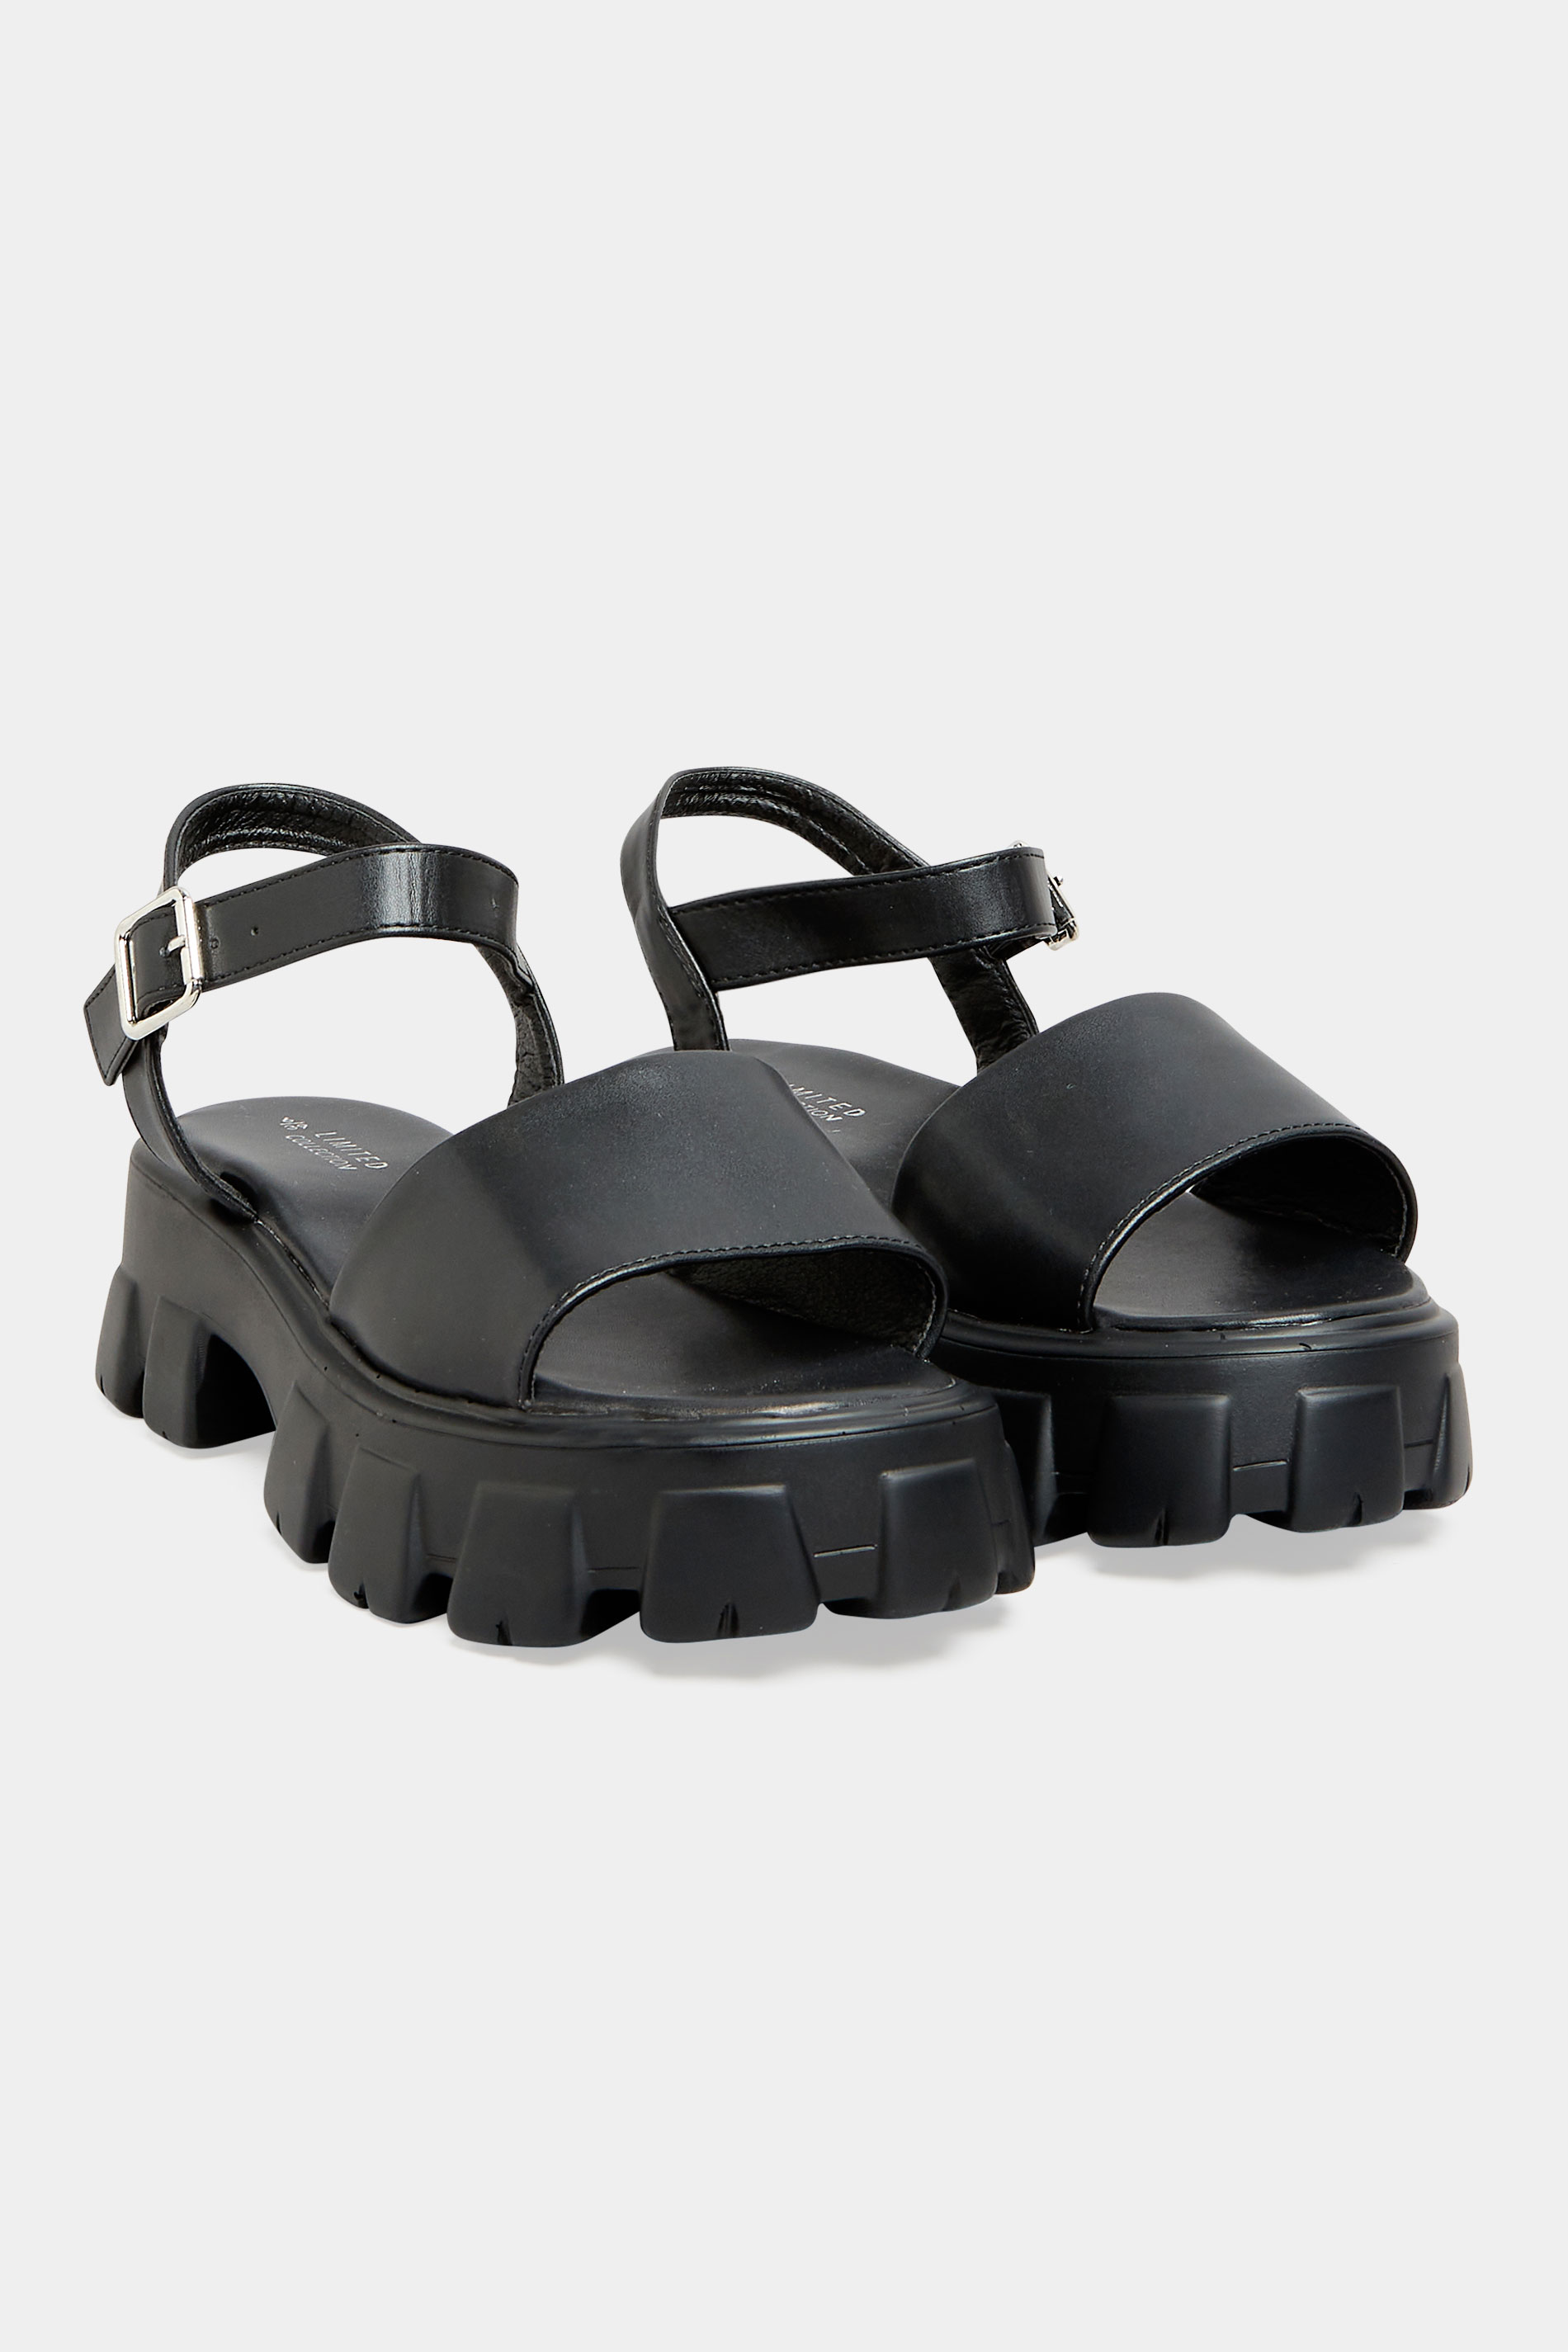 Chaussures Pieds Larges Sandales Pieds Larges | LIMITED COLLECTION - Sandales Plateformes Noires Pieds Extra Larges EEE - FO36570